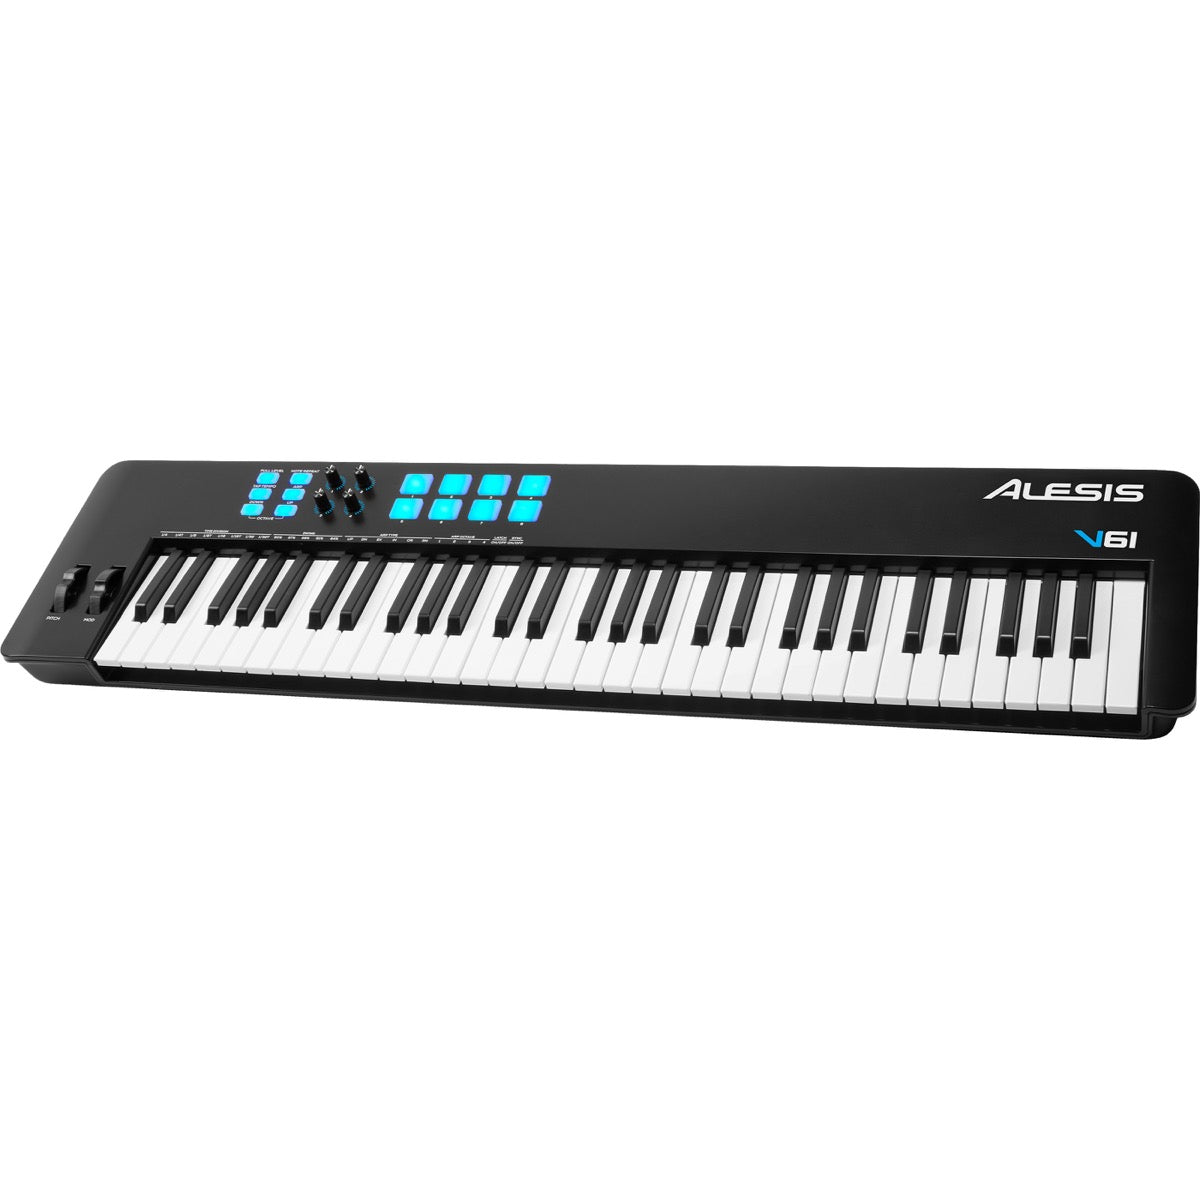 Introducing the Alesis V MKII Series 